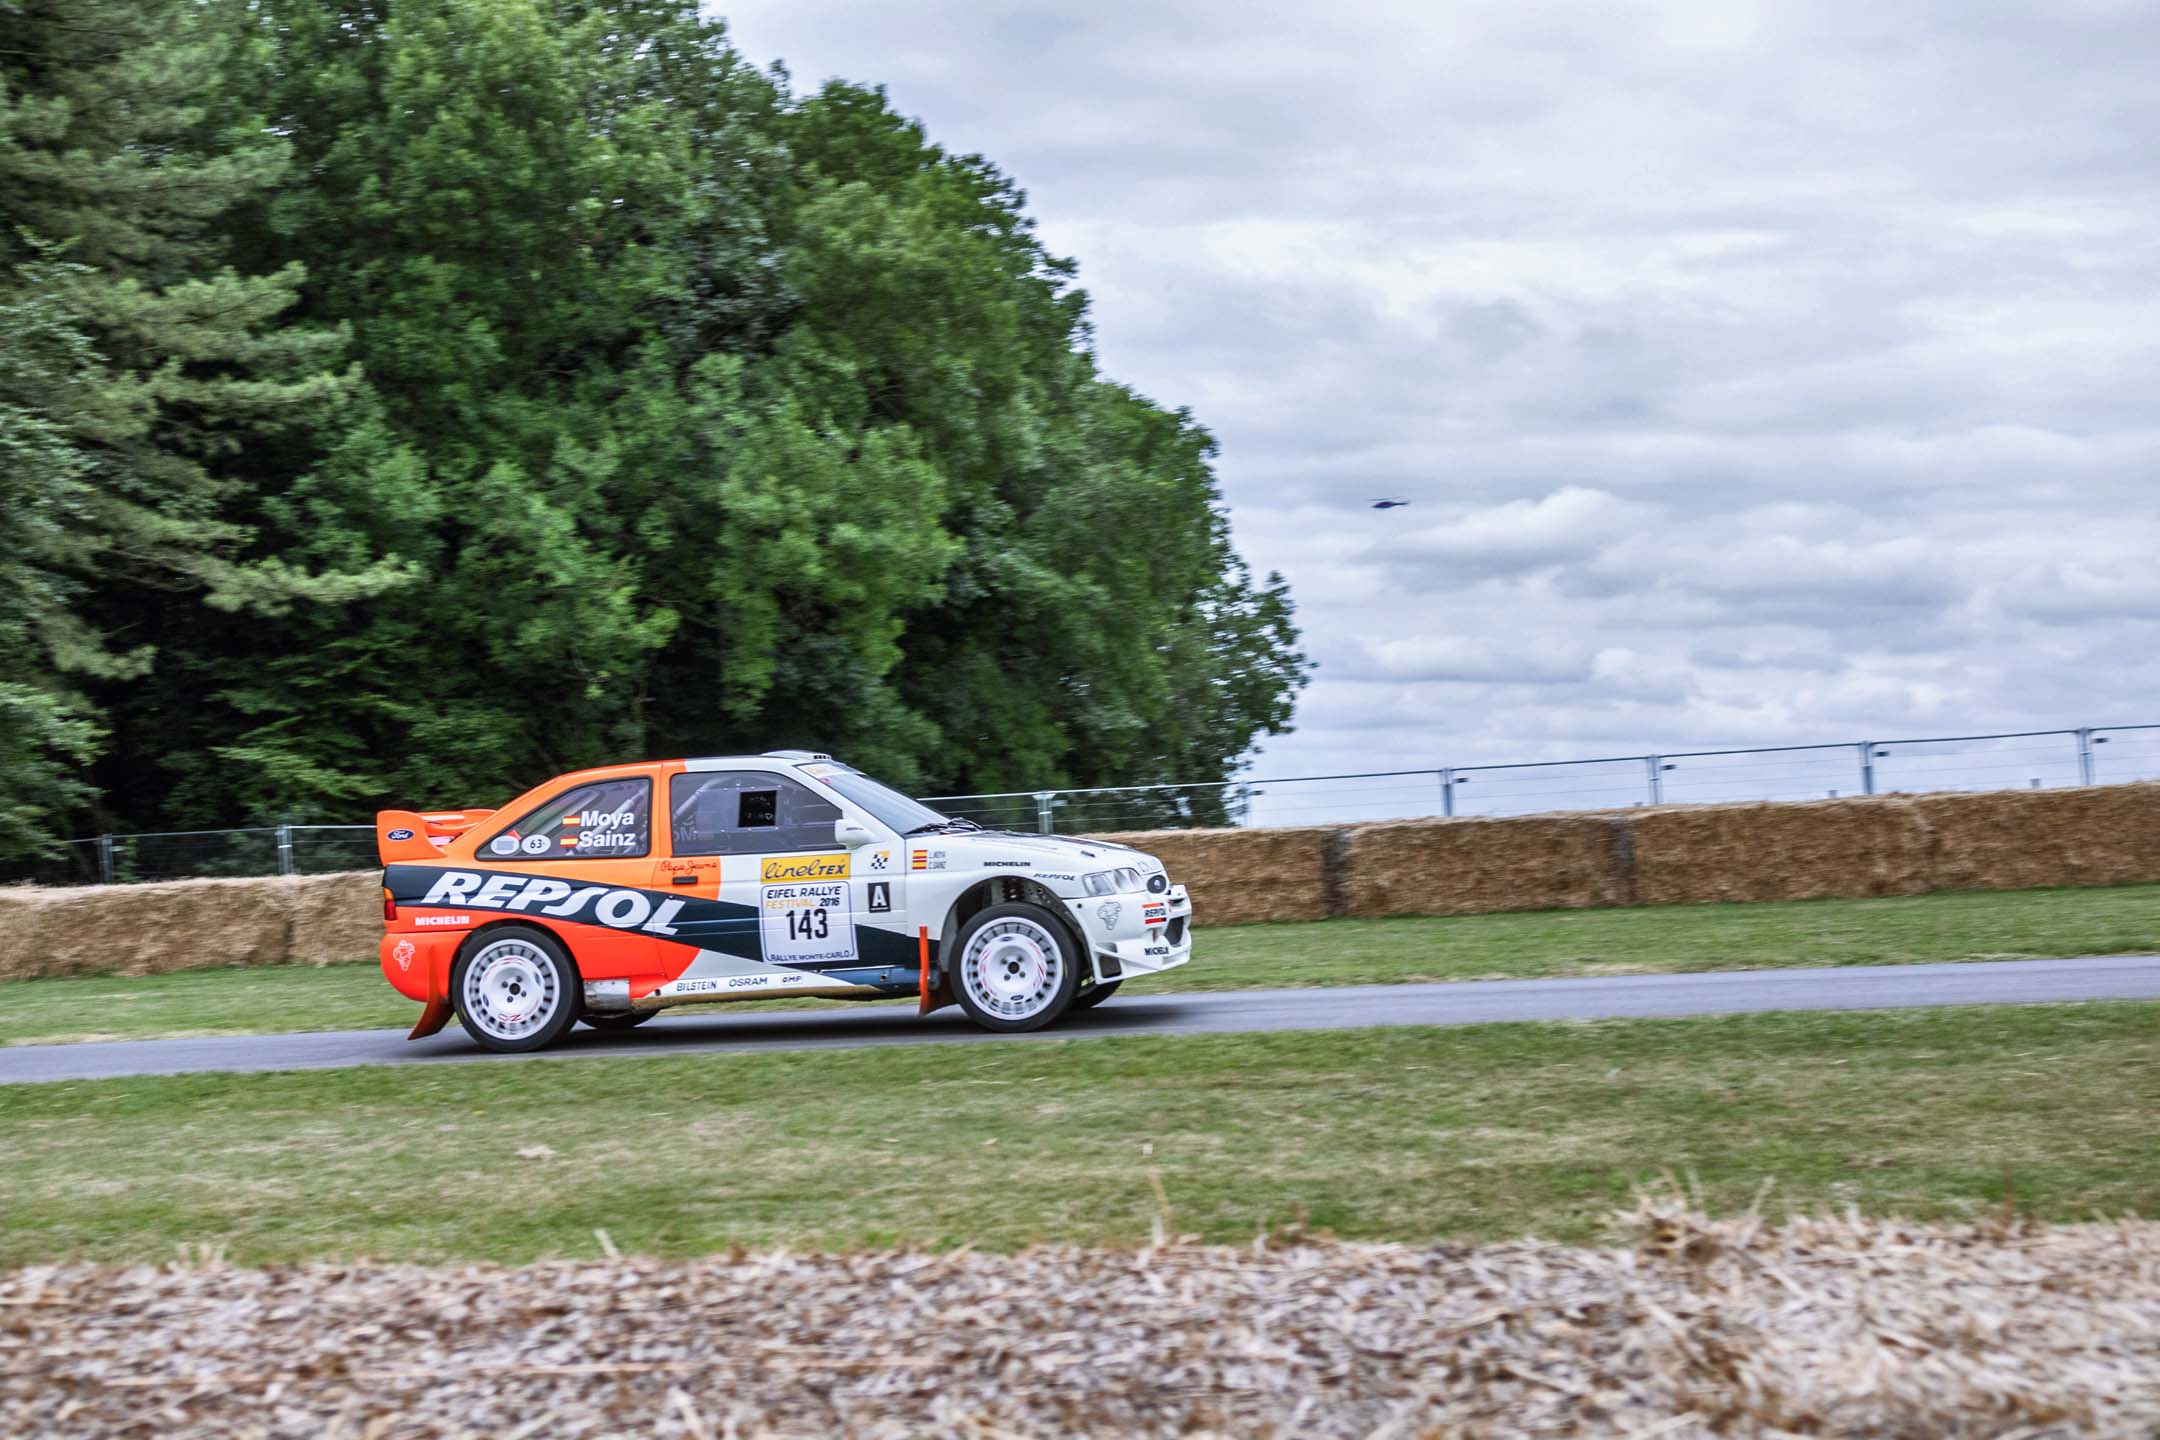 The rally machines go up the hill too, and are often among the fastest cars to do so. This Escort Cosworth still has the names of WRC champion Carlos Sainz and co-driver Luis Moya on the back window.